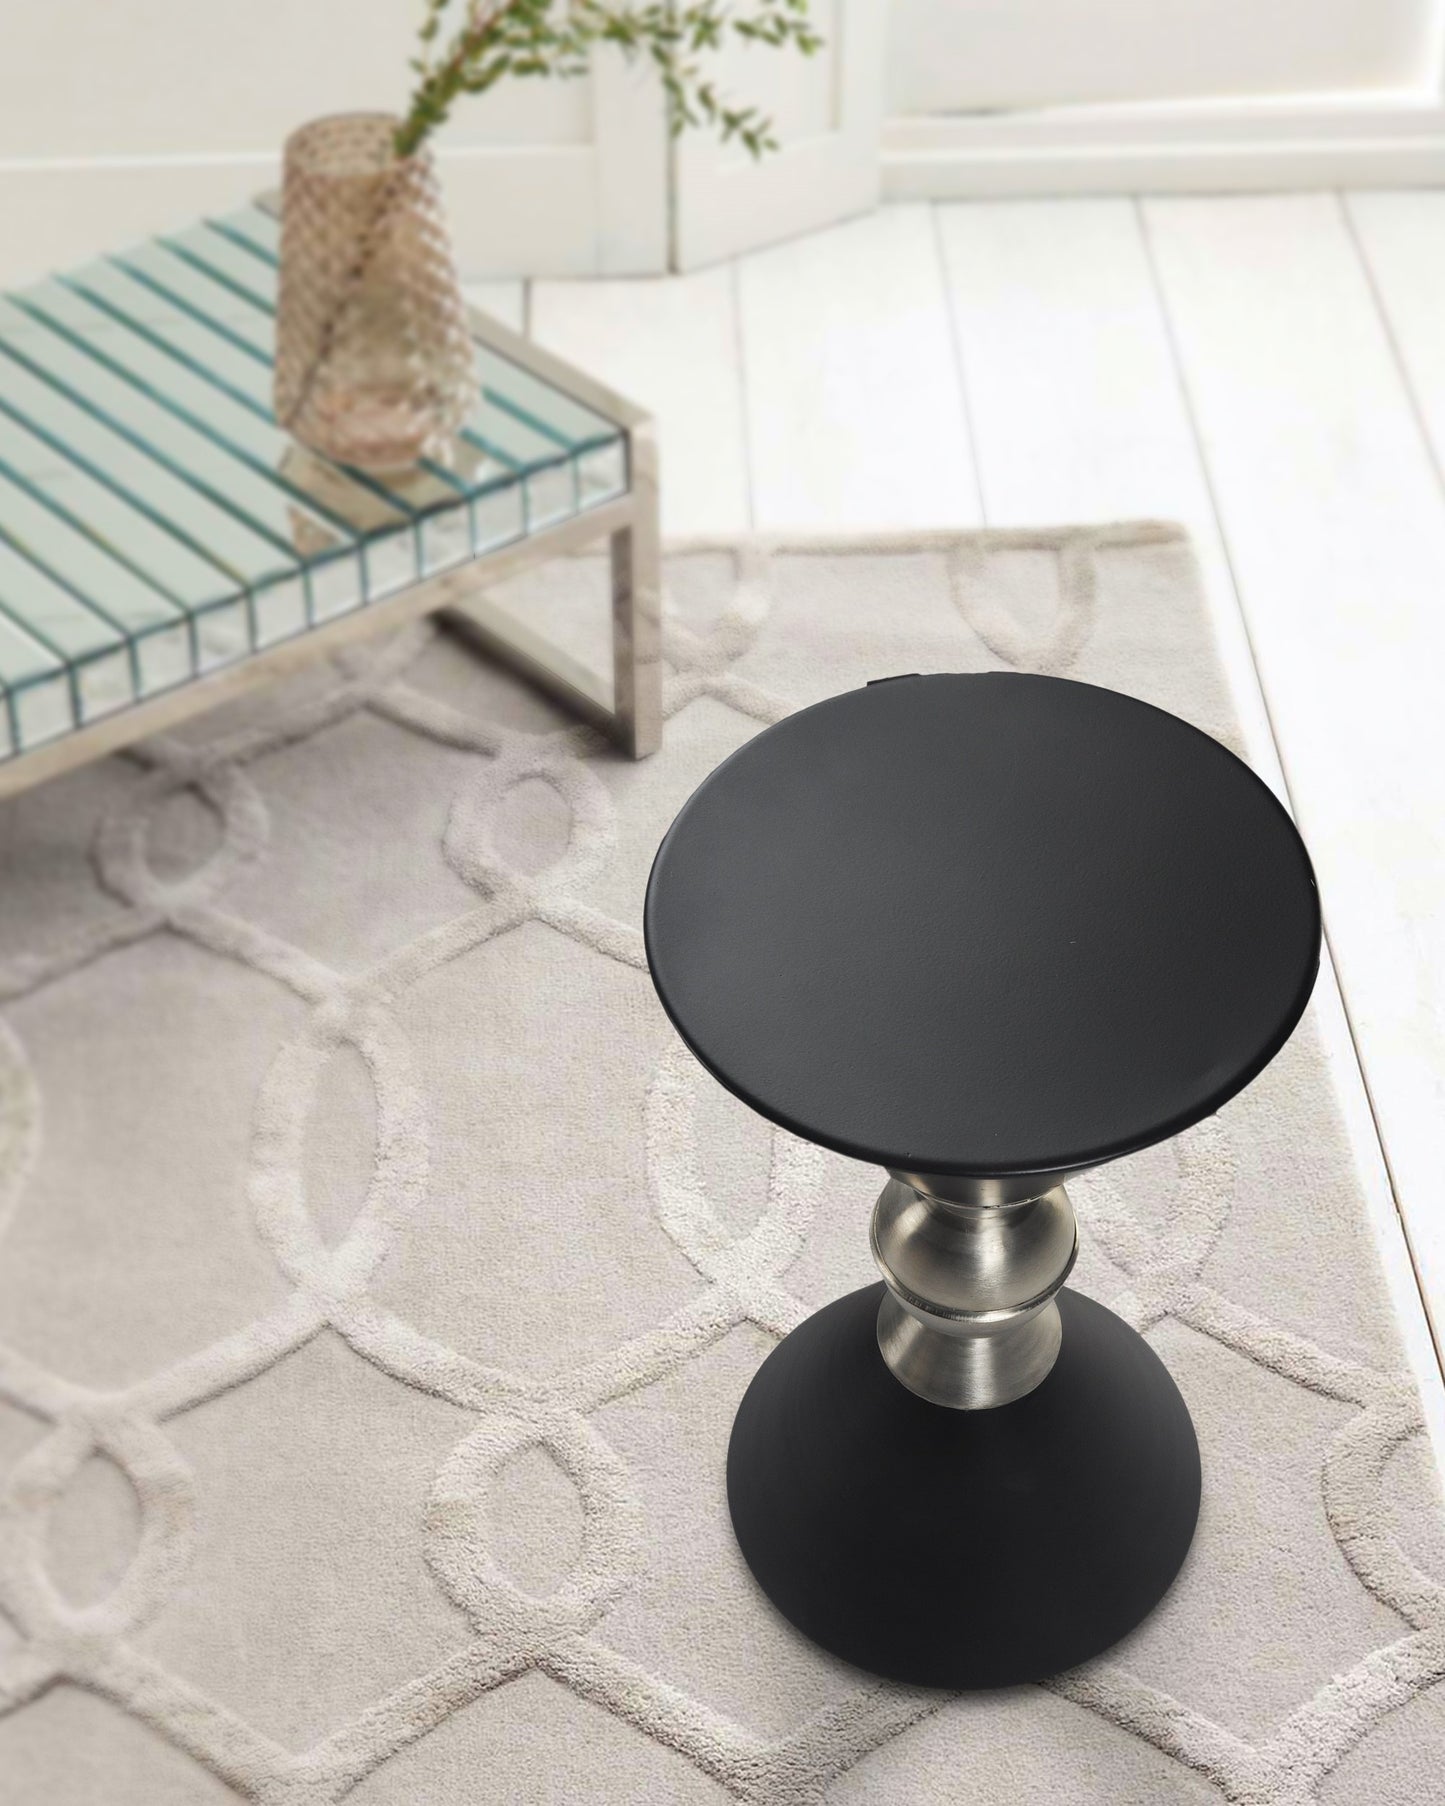 20" Black Iron Free Form End Table